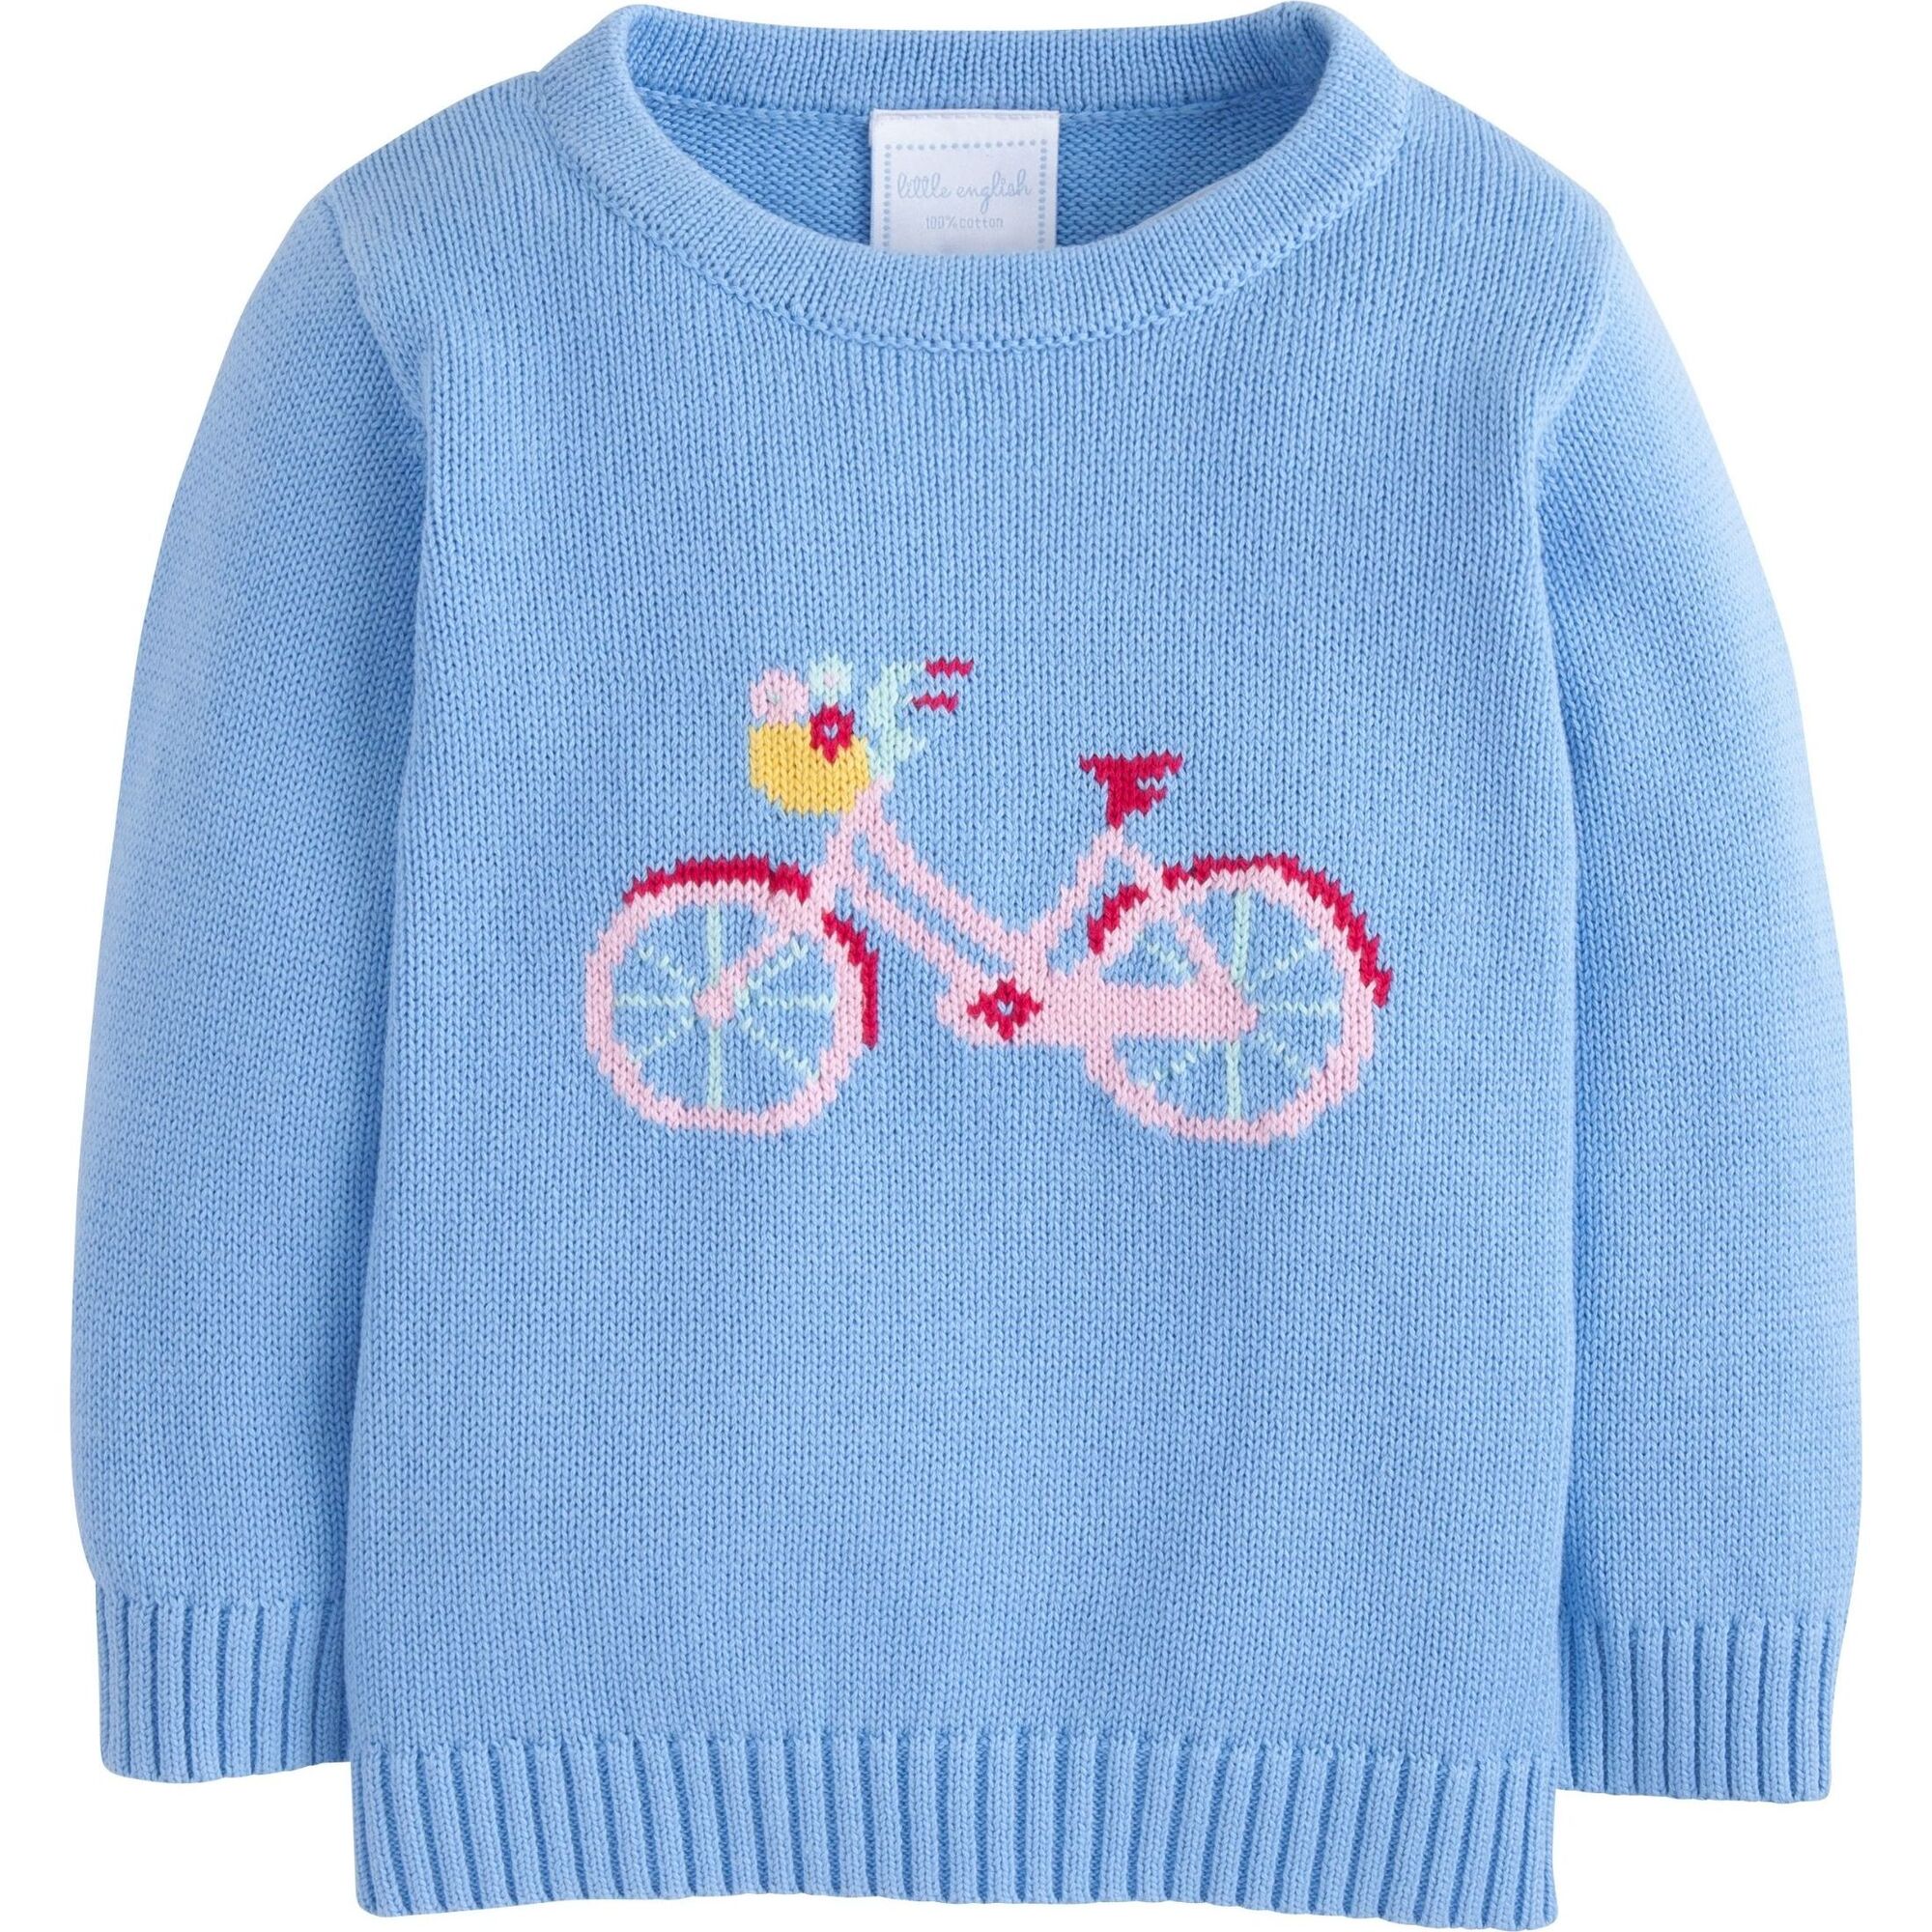 Vintage Bicycle Intarsia Sweater, Blue - Little English Tops